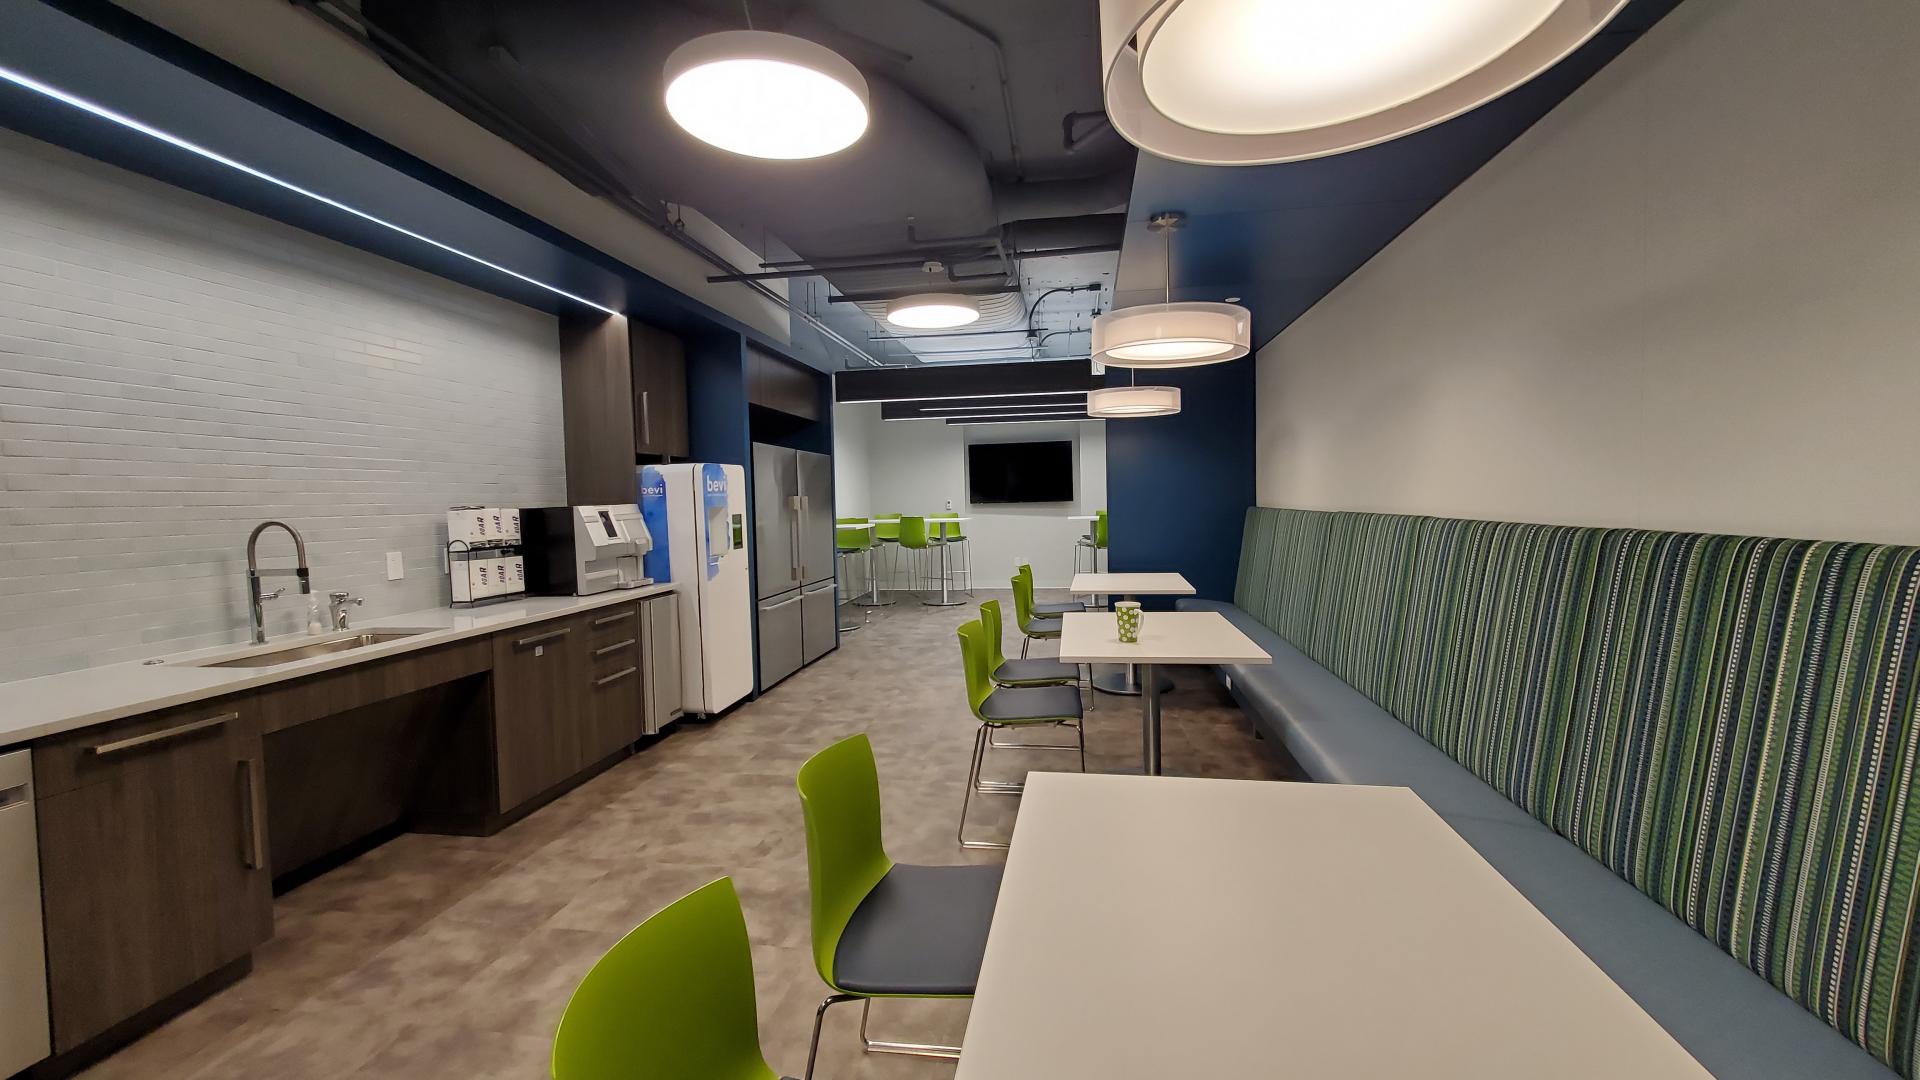 Pantry and lunch area with banquette seating also functions as collaborative teaming area.